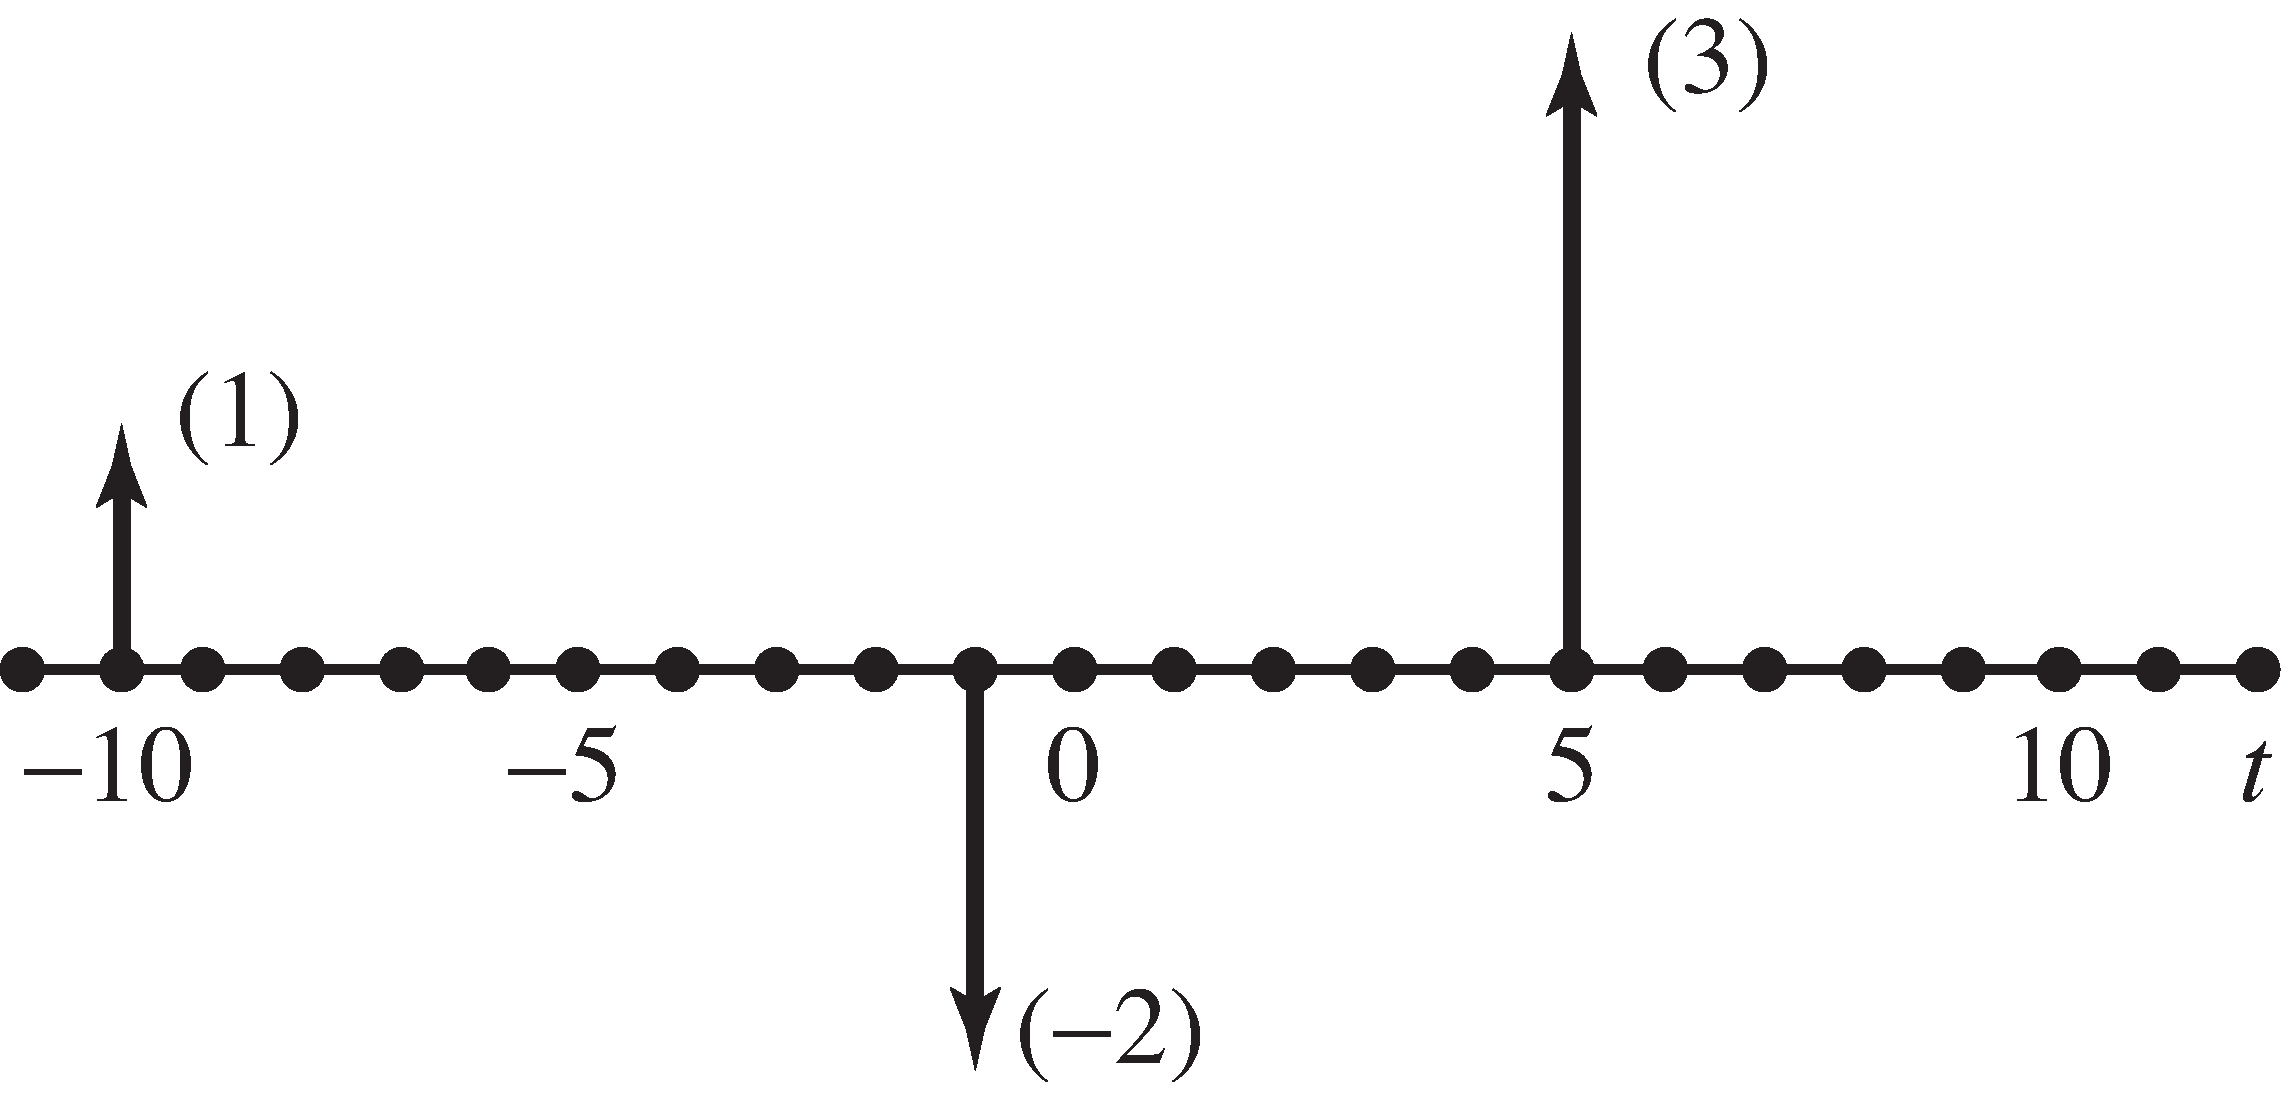 The function w(t)=δ(t+10)-2δ(t+1)+3δ(t-5) consisting of three weighted δ functions is represented graphically as three weighted arrows at t= -10, -1, 5, weighted by the appropriate constants.